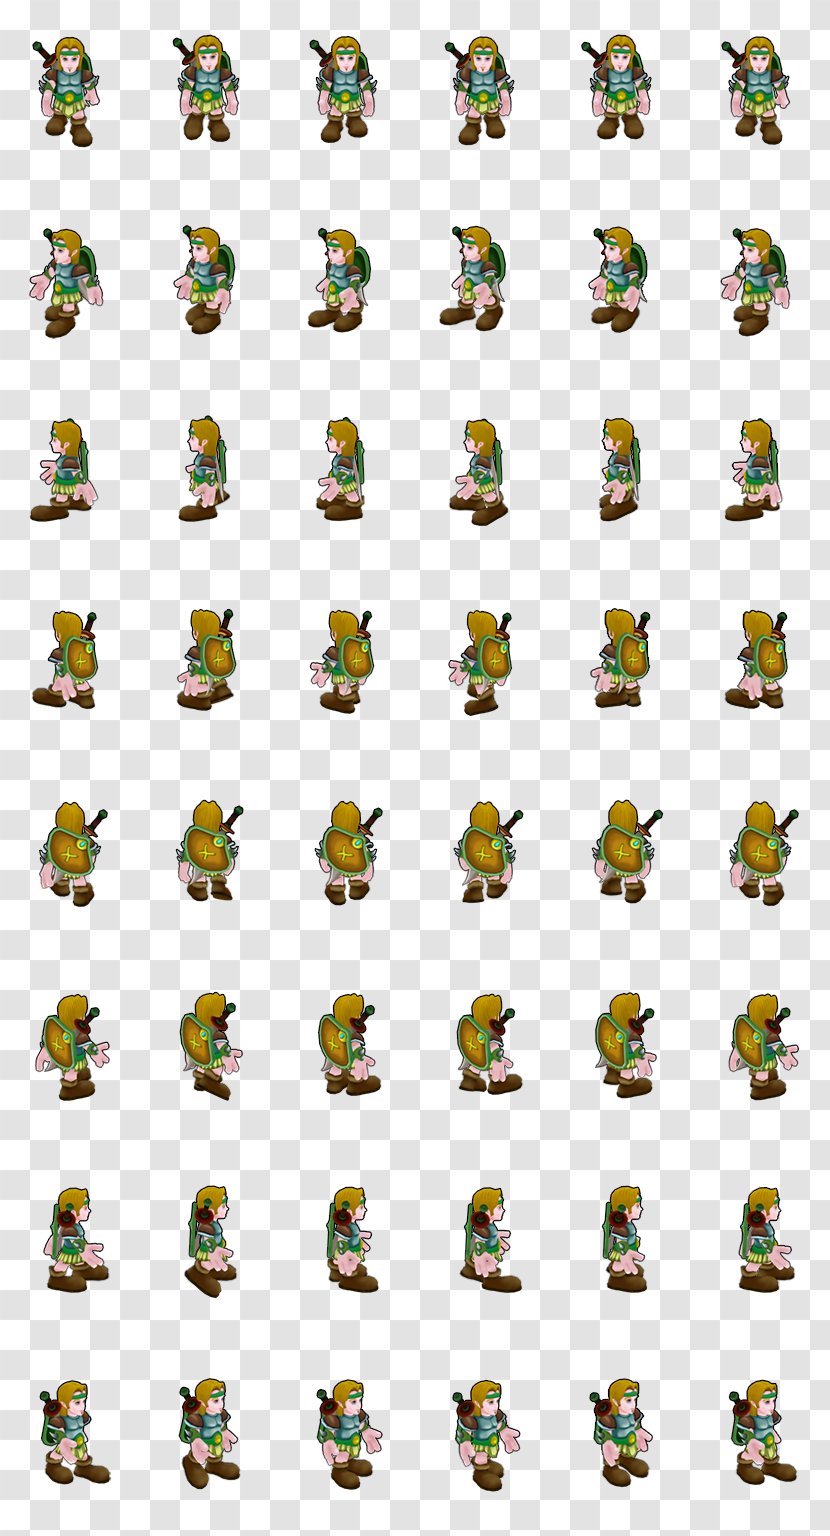 Tile-based Video Game Isometric Graphics In Games And Pixel Art Line Font - Sprite Warrior Transparent PNG